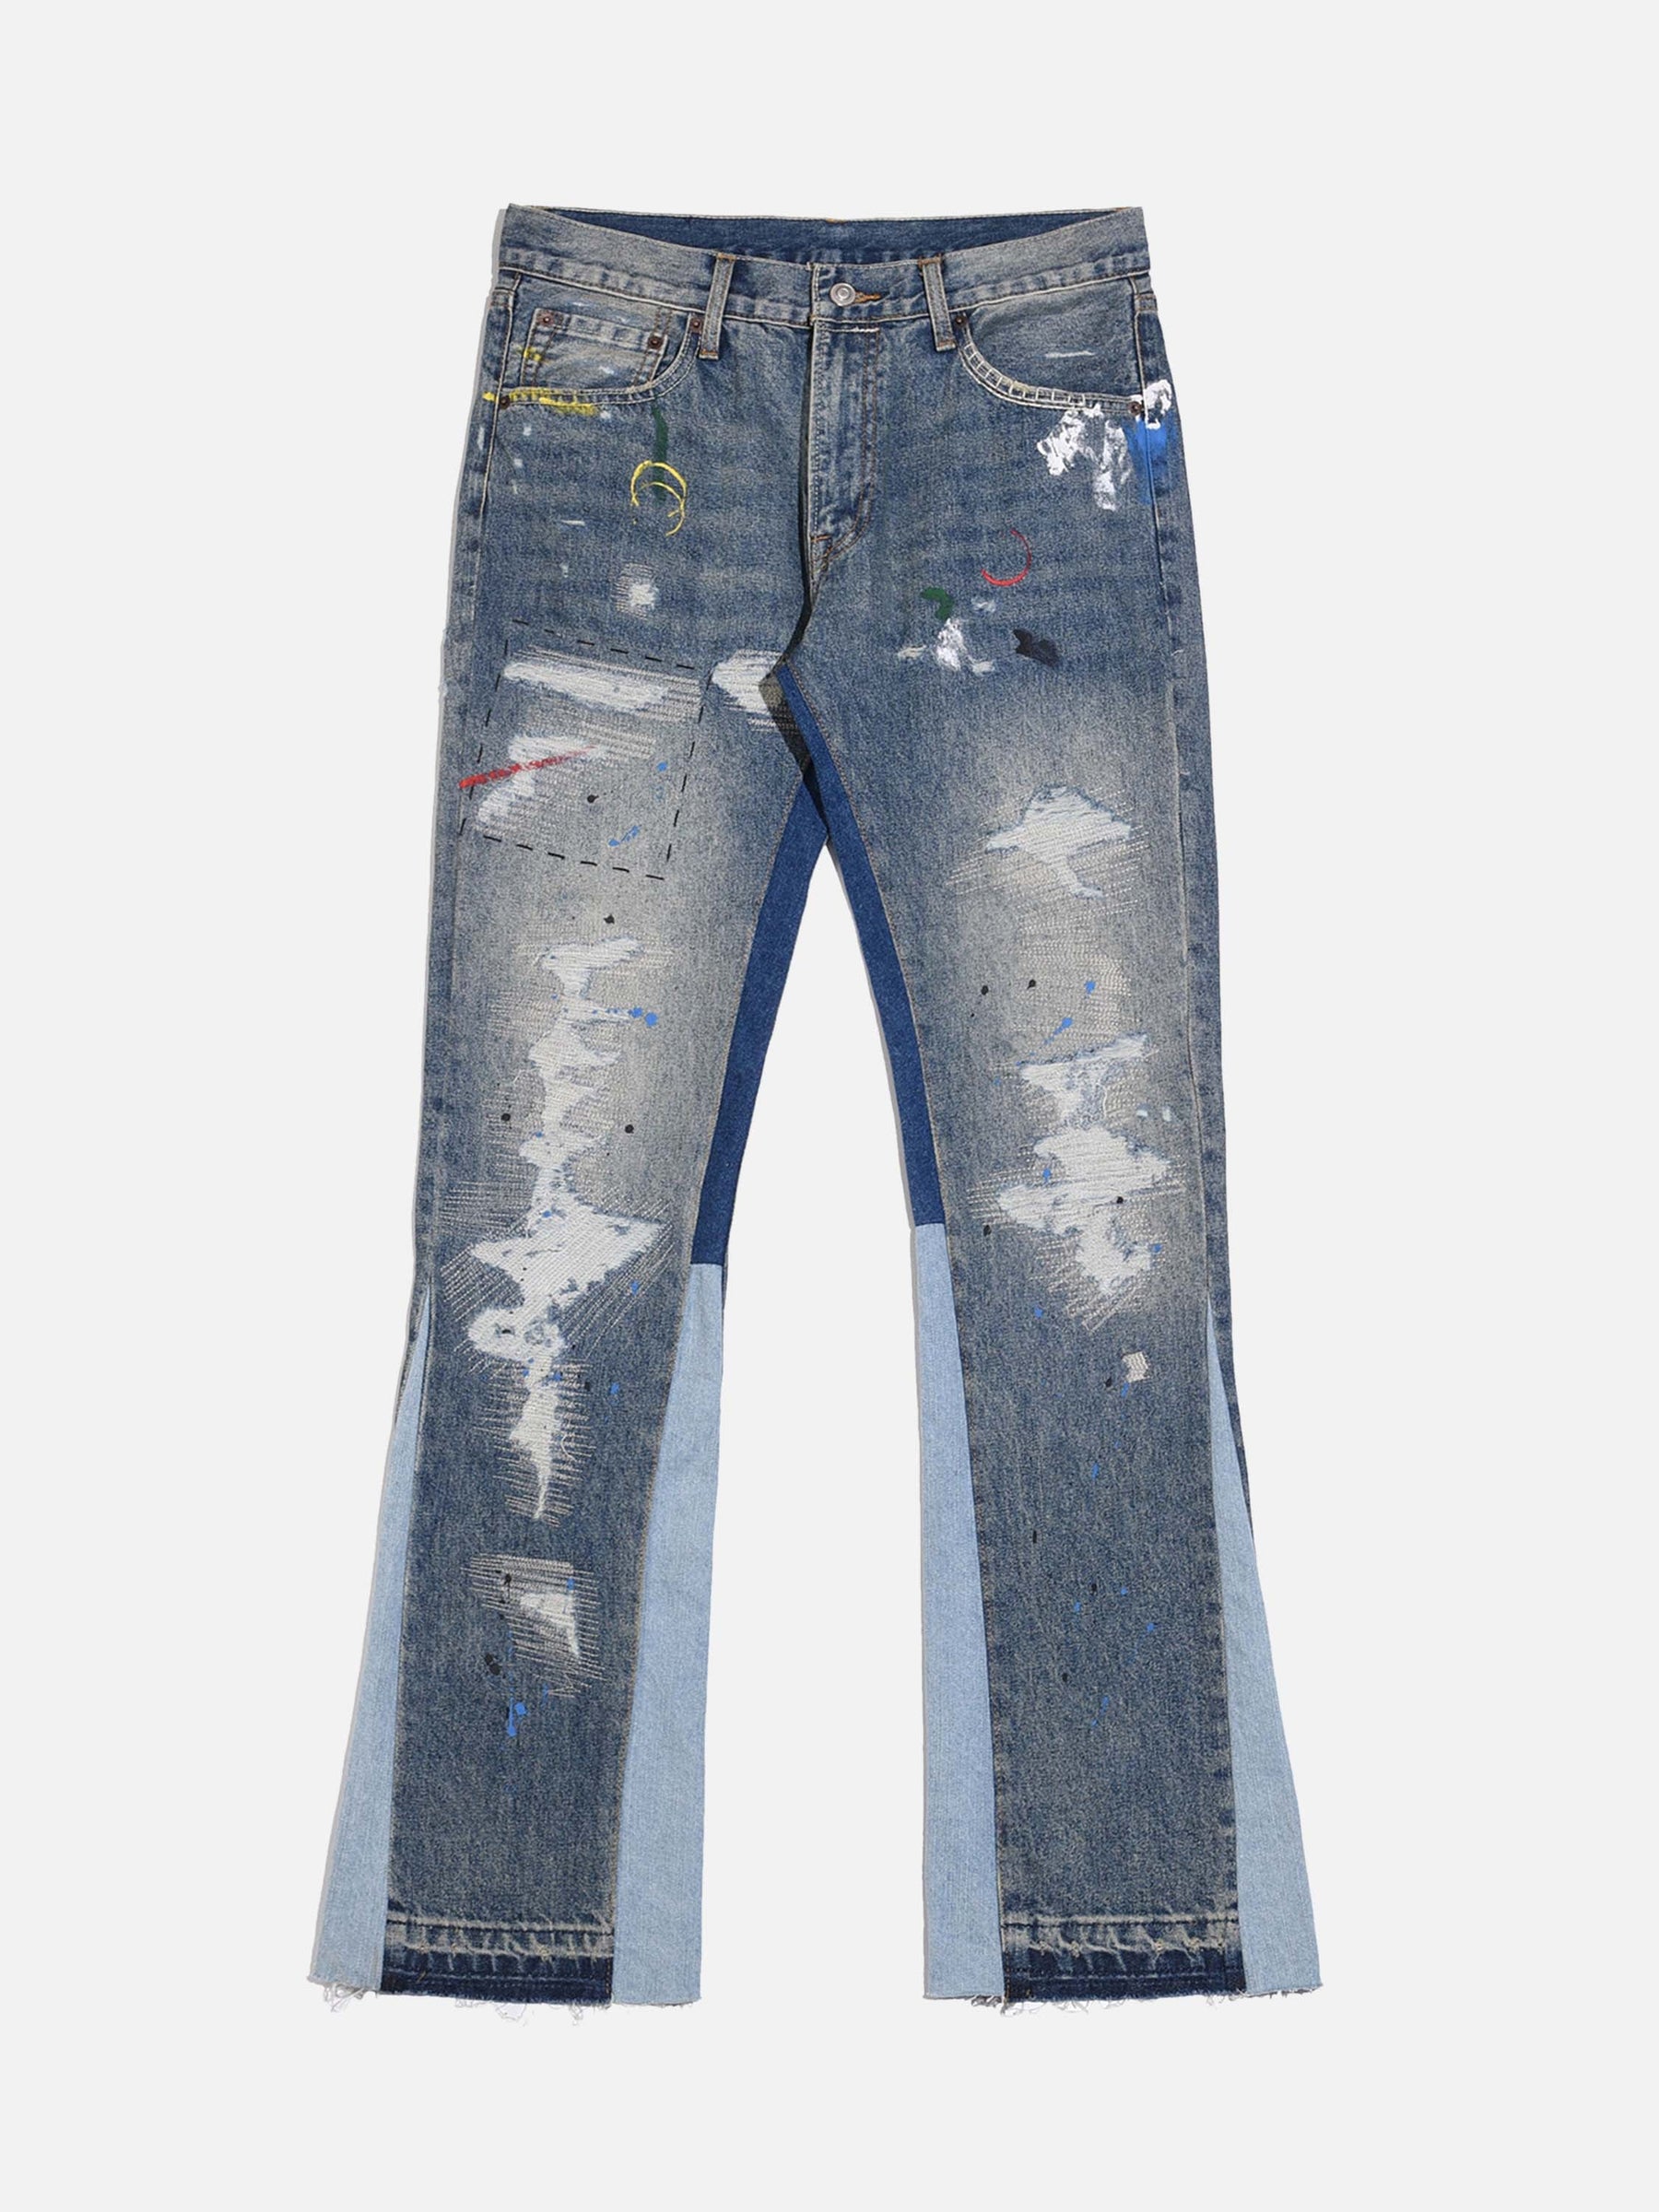 LUXENFY™ - Splashing Ink Patchwork Jeans luxenfy.com